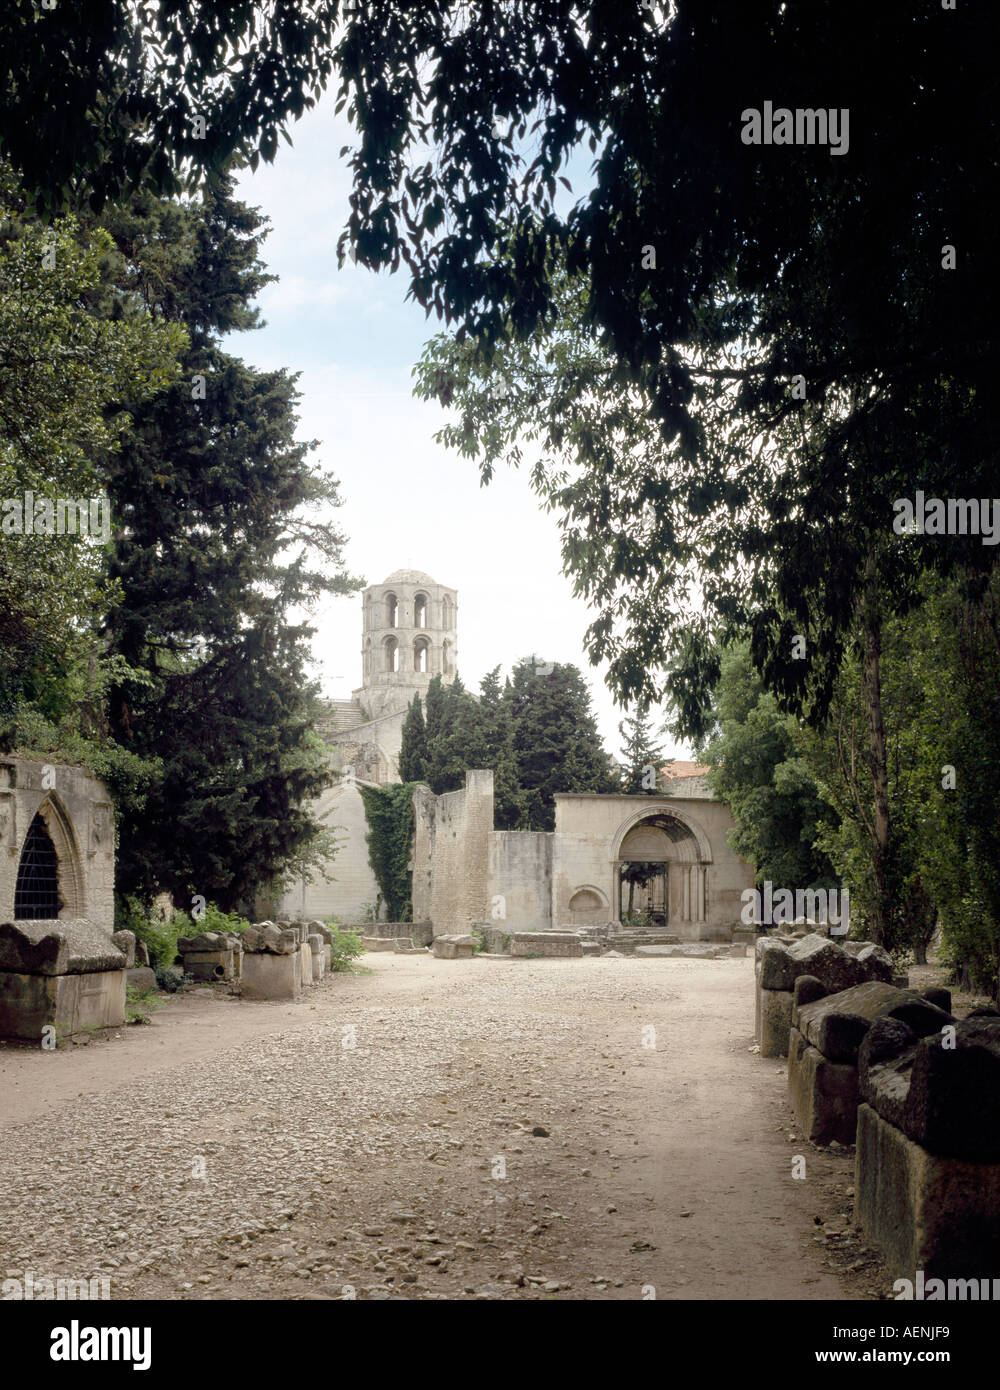 Arles, Les Alyscamps mit St-Honorat, Stock Photo